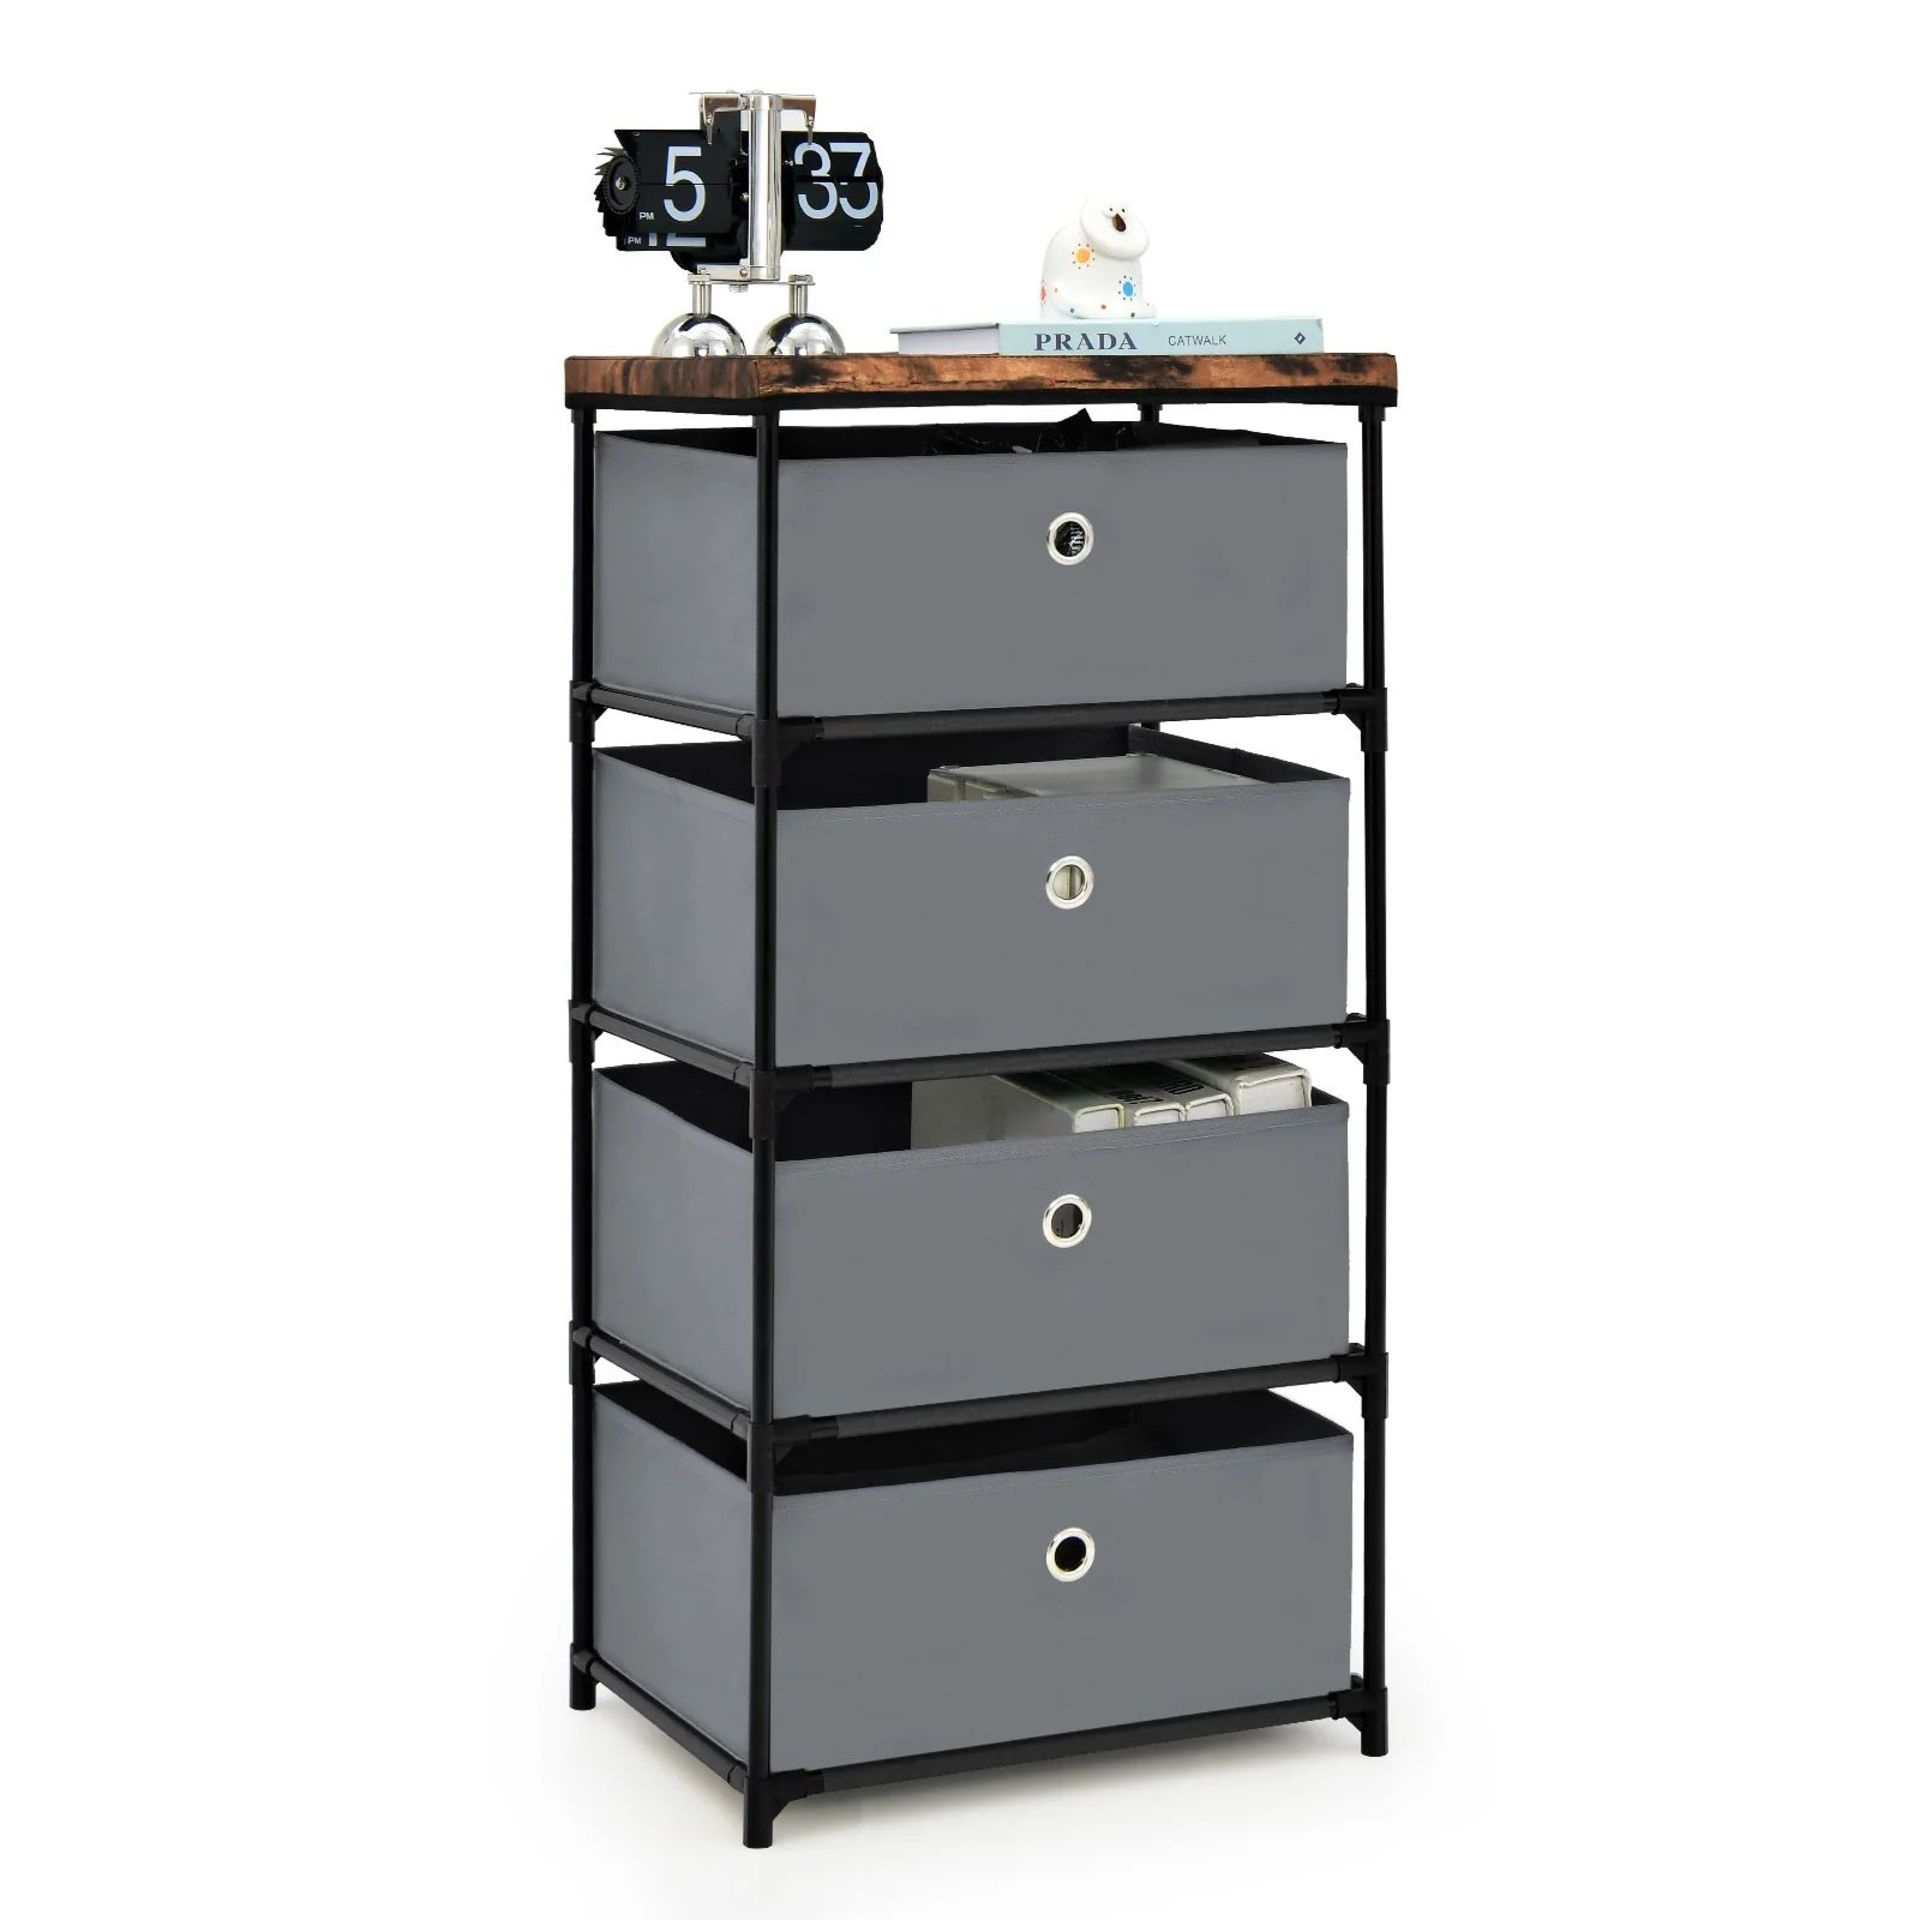 4-Tier Fabric Dresser with Drawers and Metal Frame-Grey. - ER53.